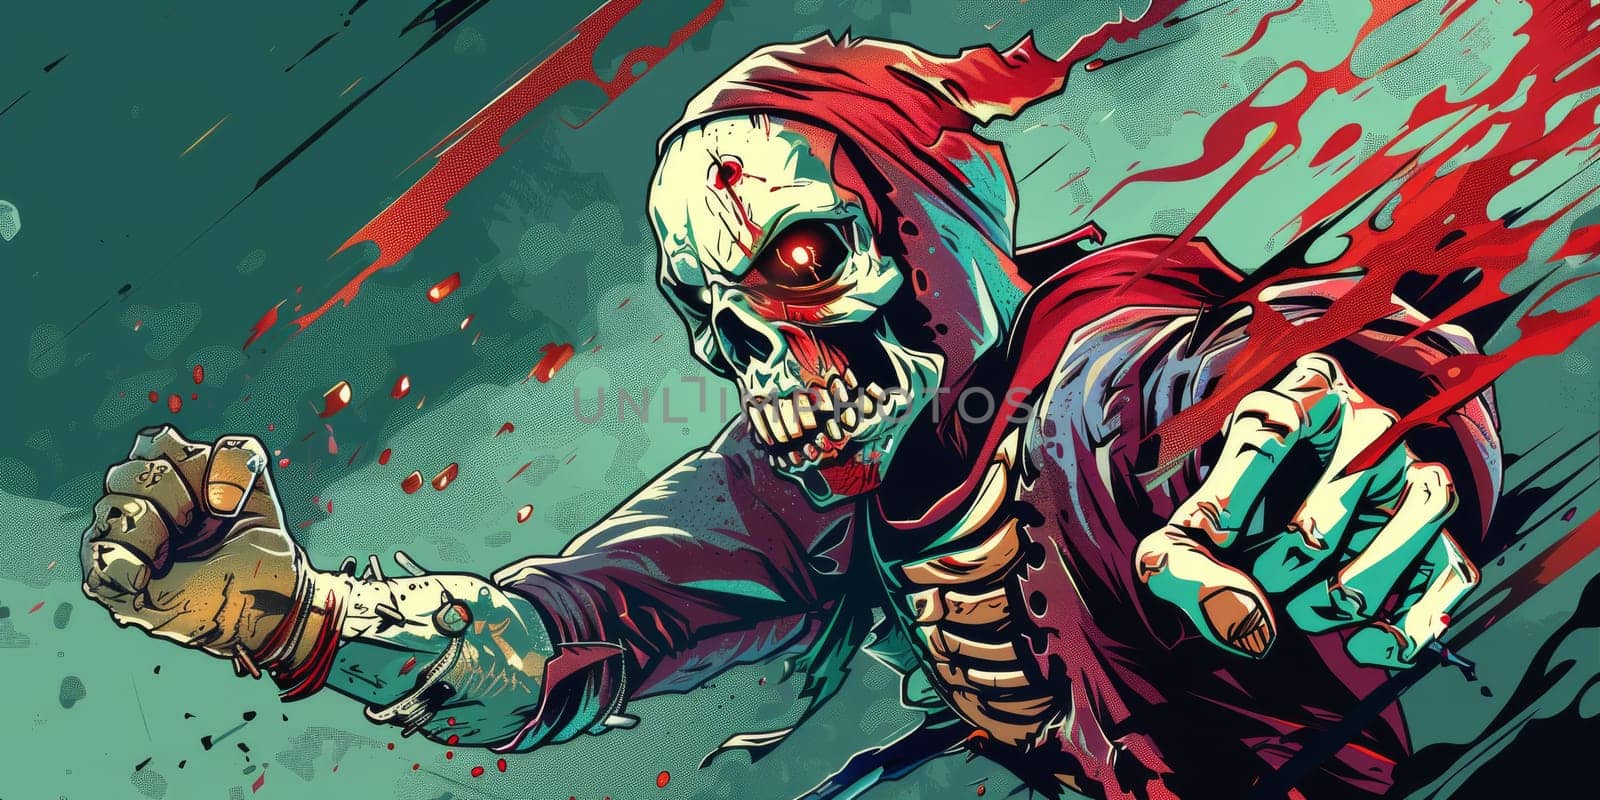 Rush, creepy, a hooded skeleton, death punch concept